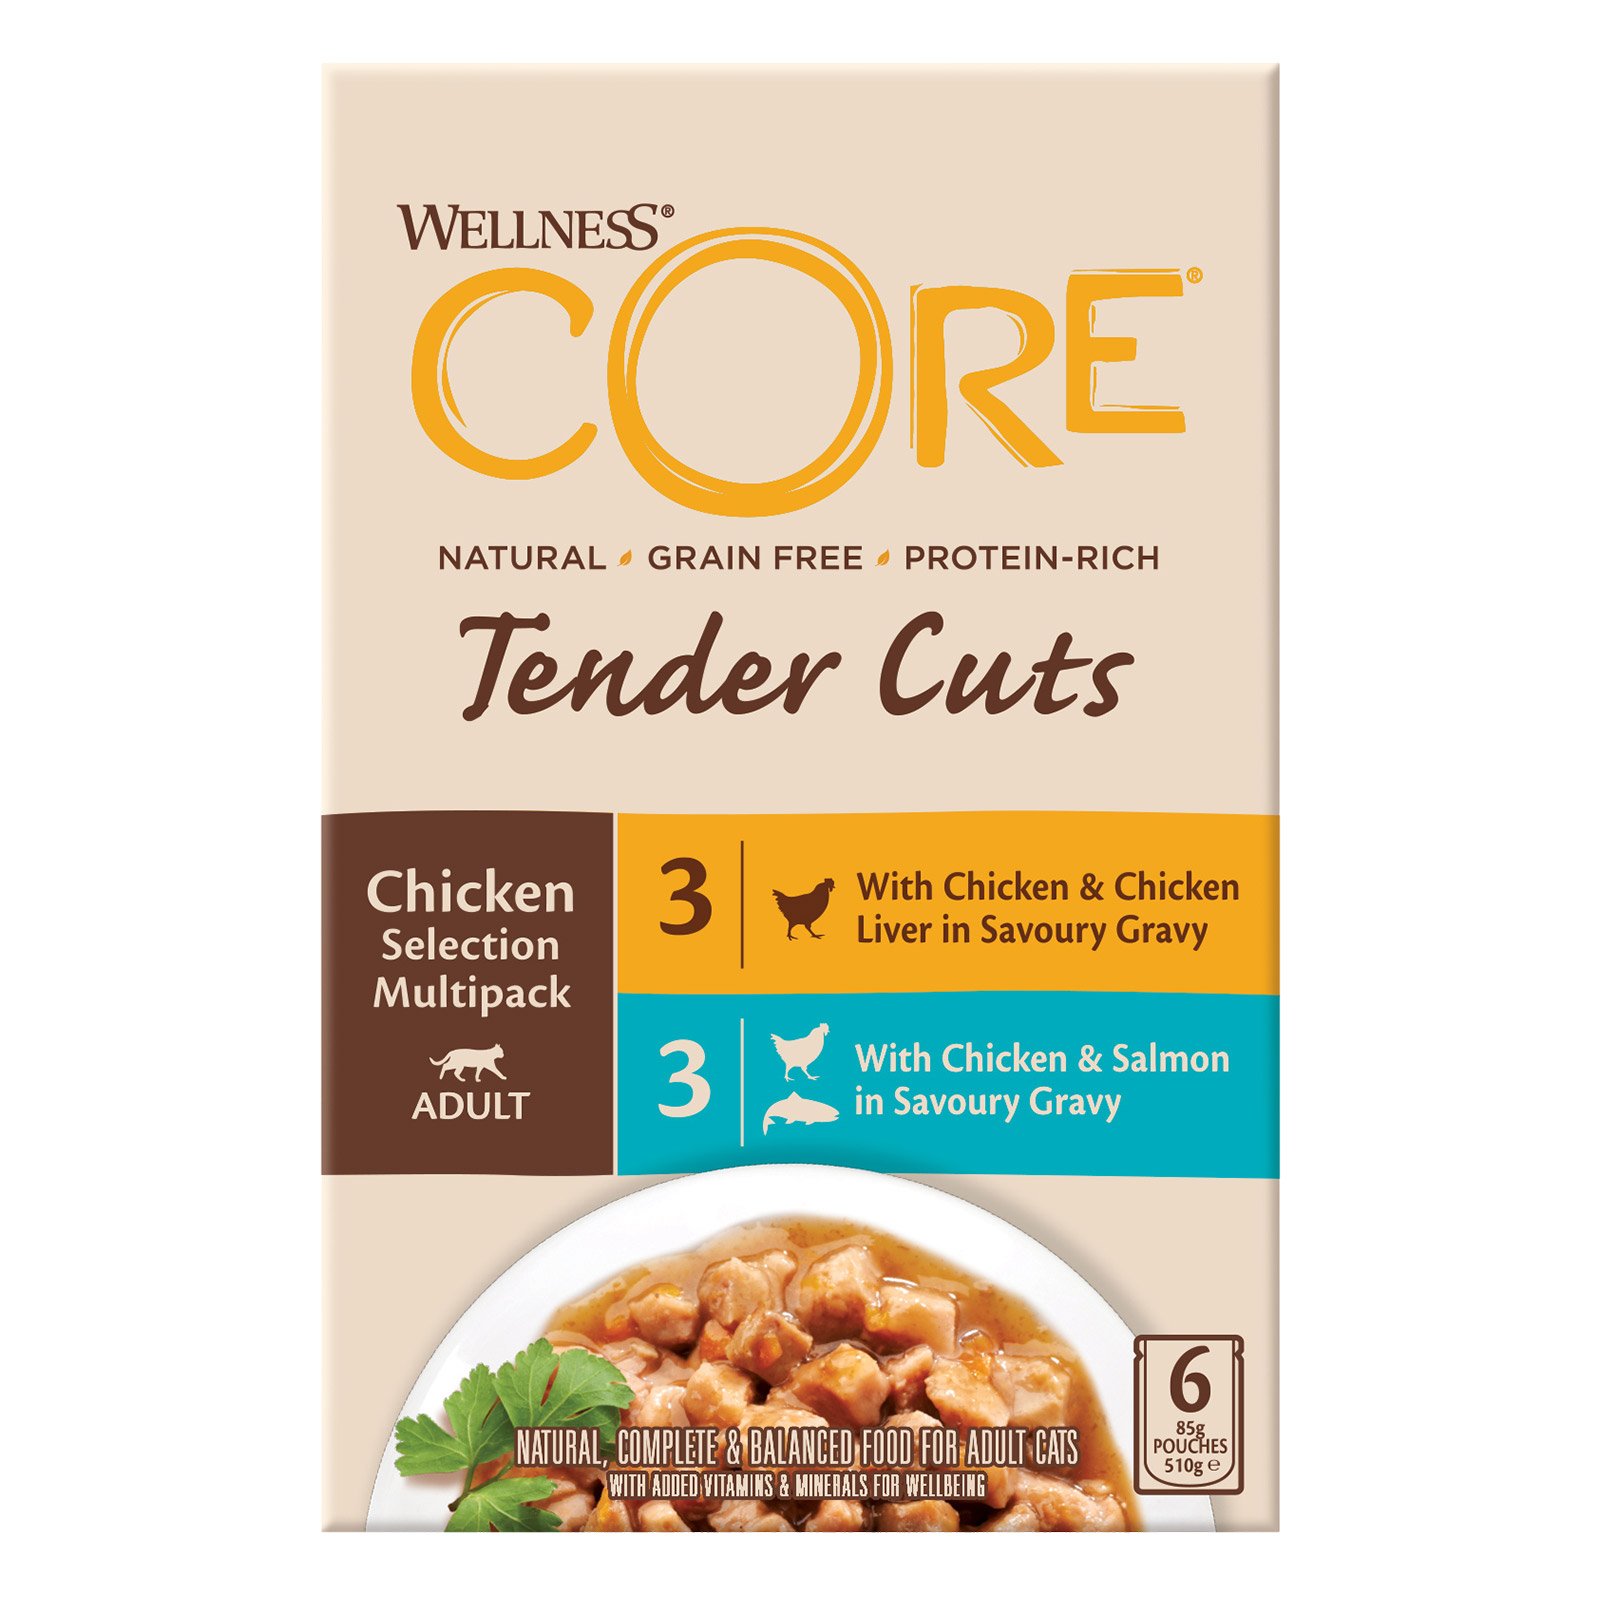 Wellness CORE Tender Cuts Chicken Selection Multipack